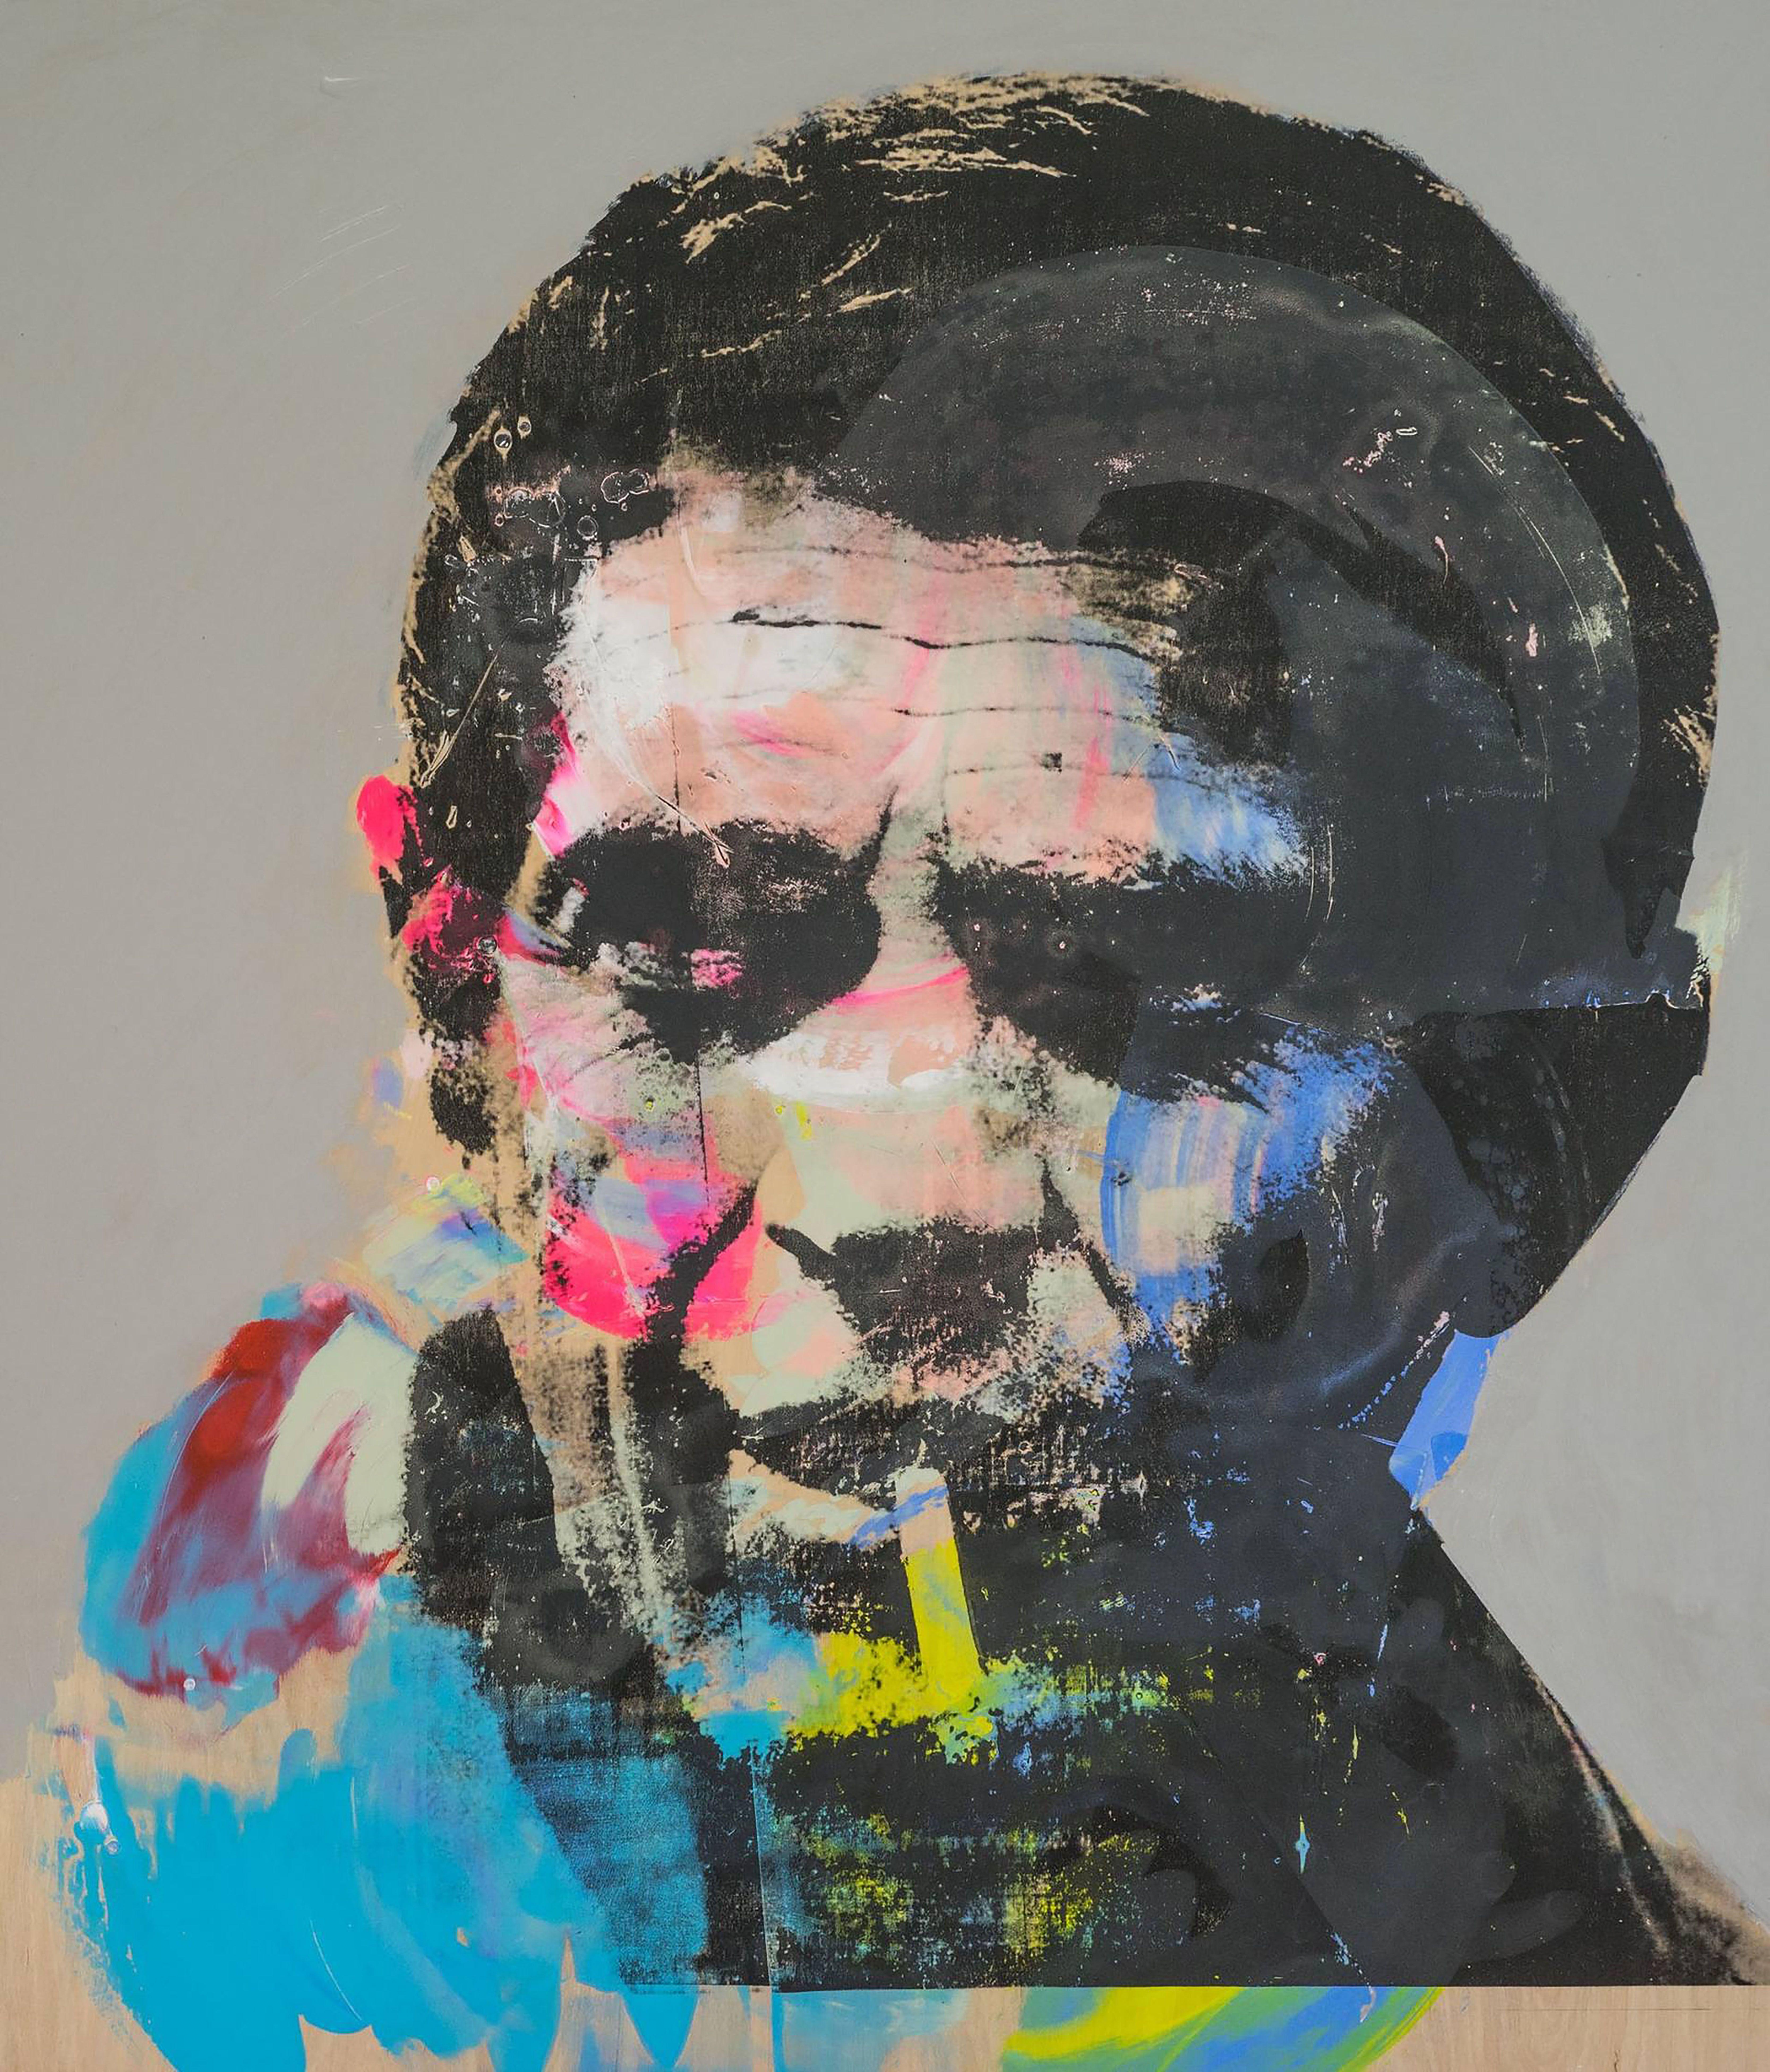 Steve McQueen Mr Cool, Mixed Media on Wood Panel - Mixed Media Art by Dane Shue